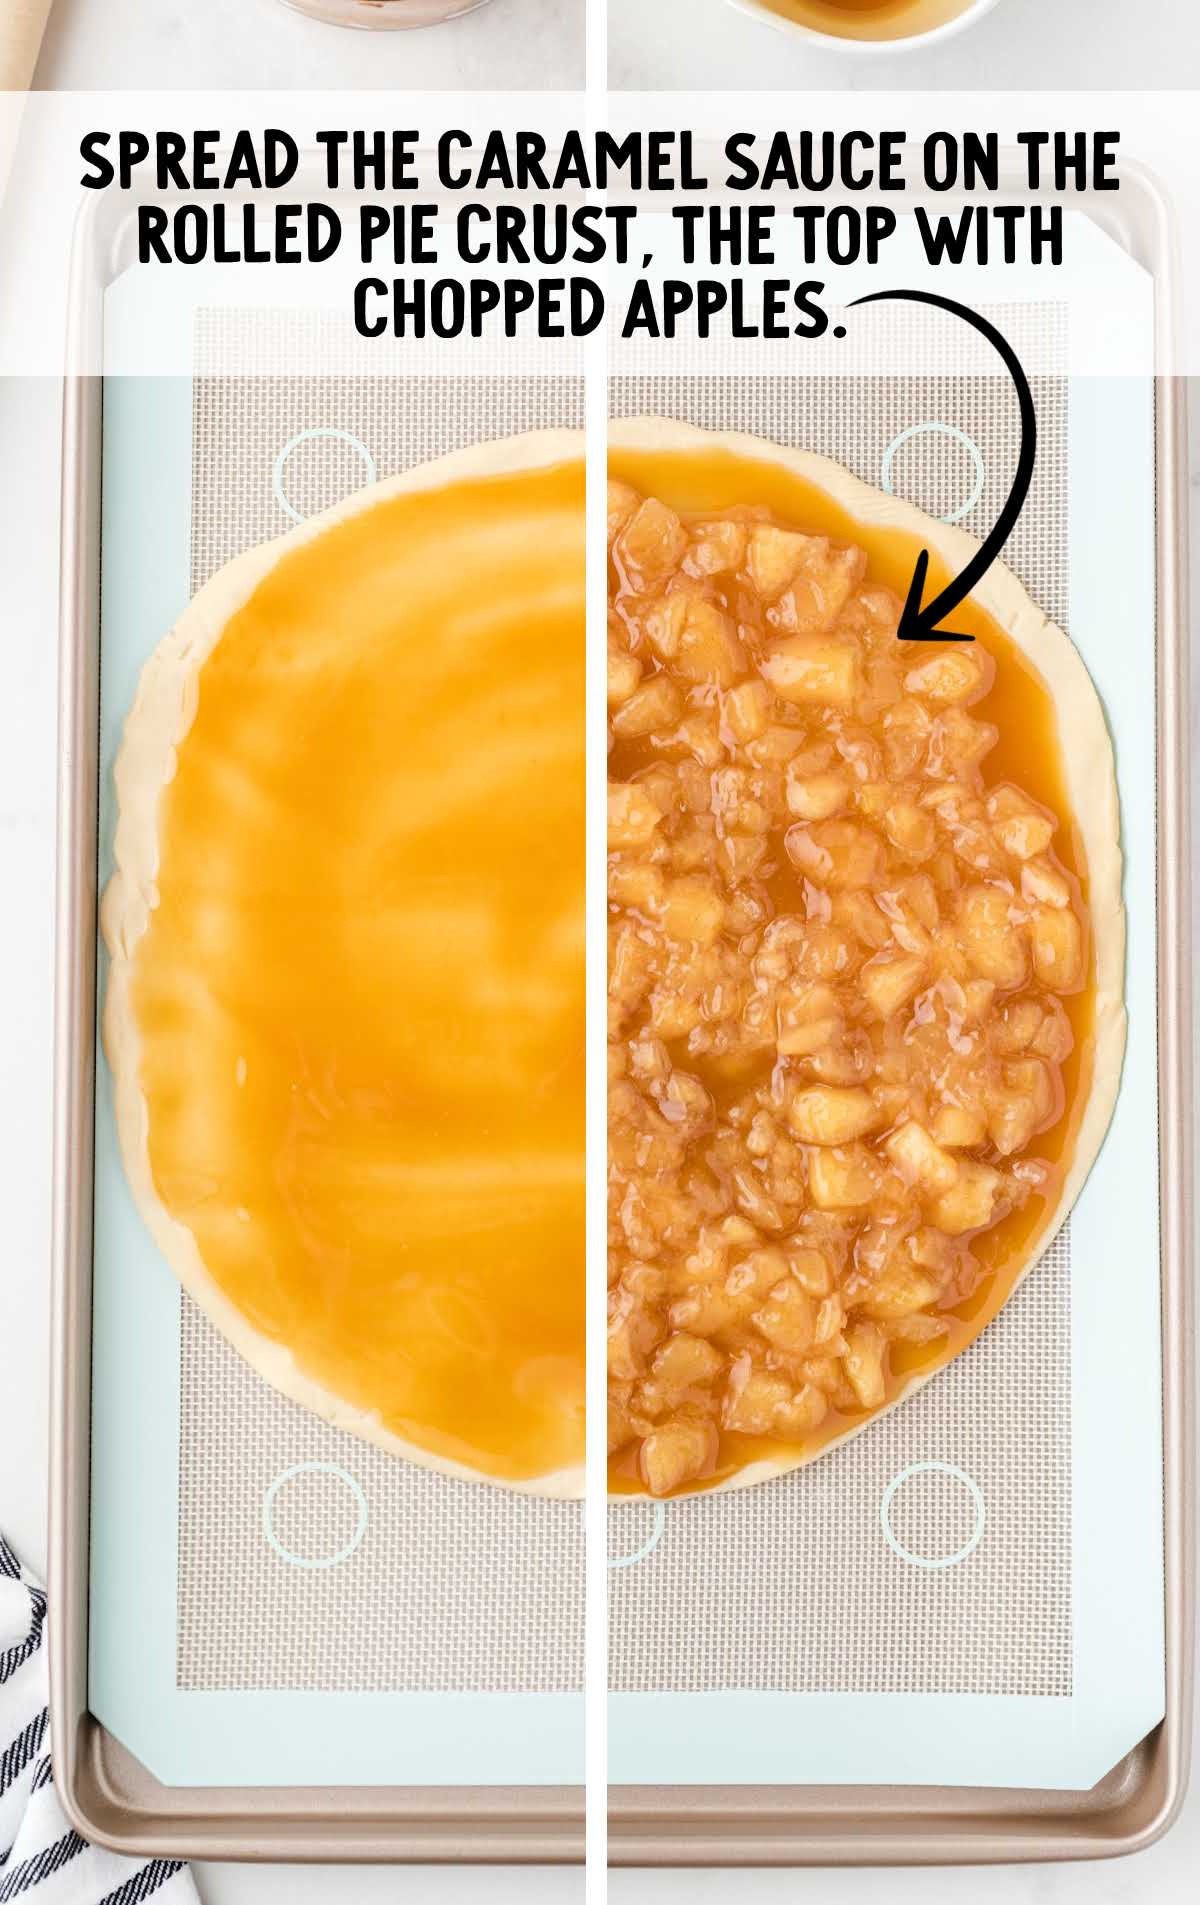 caramel sauce rolled into the pie crust and then topped with chopped apples in a baking sheet